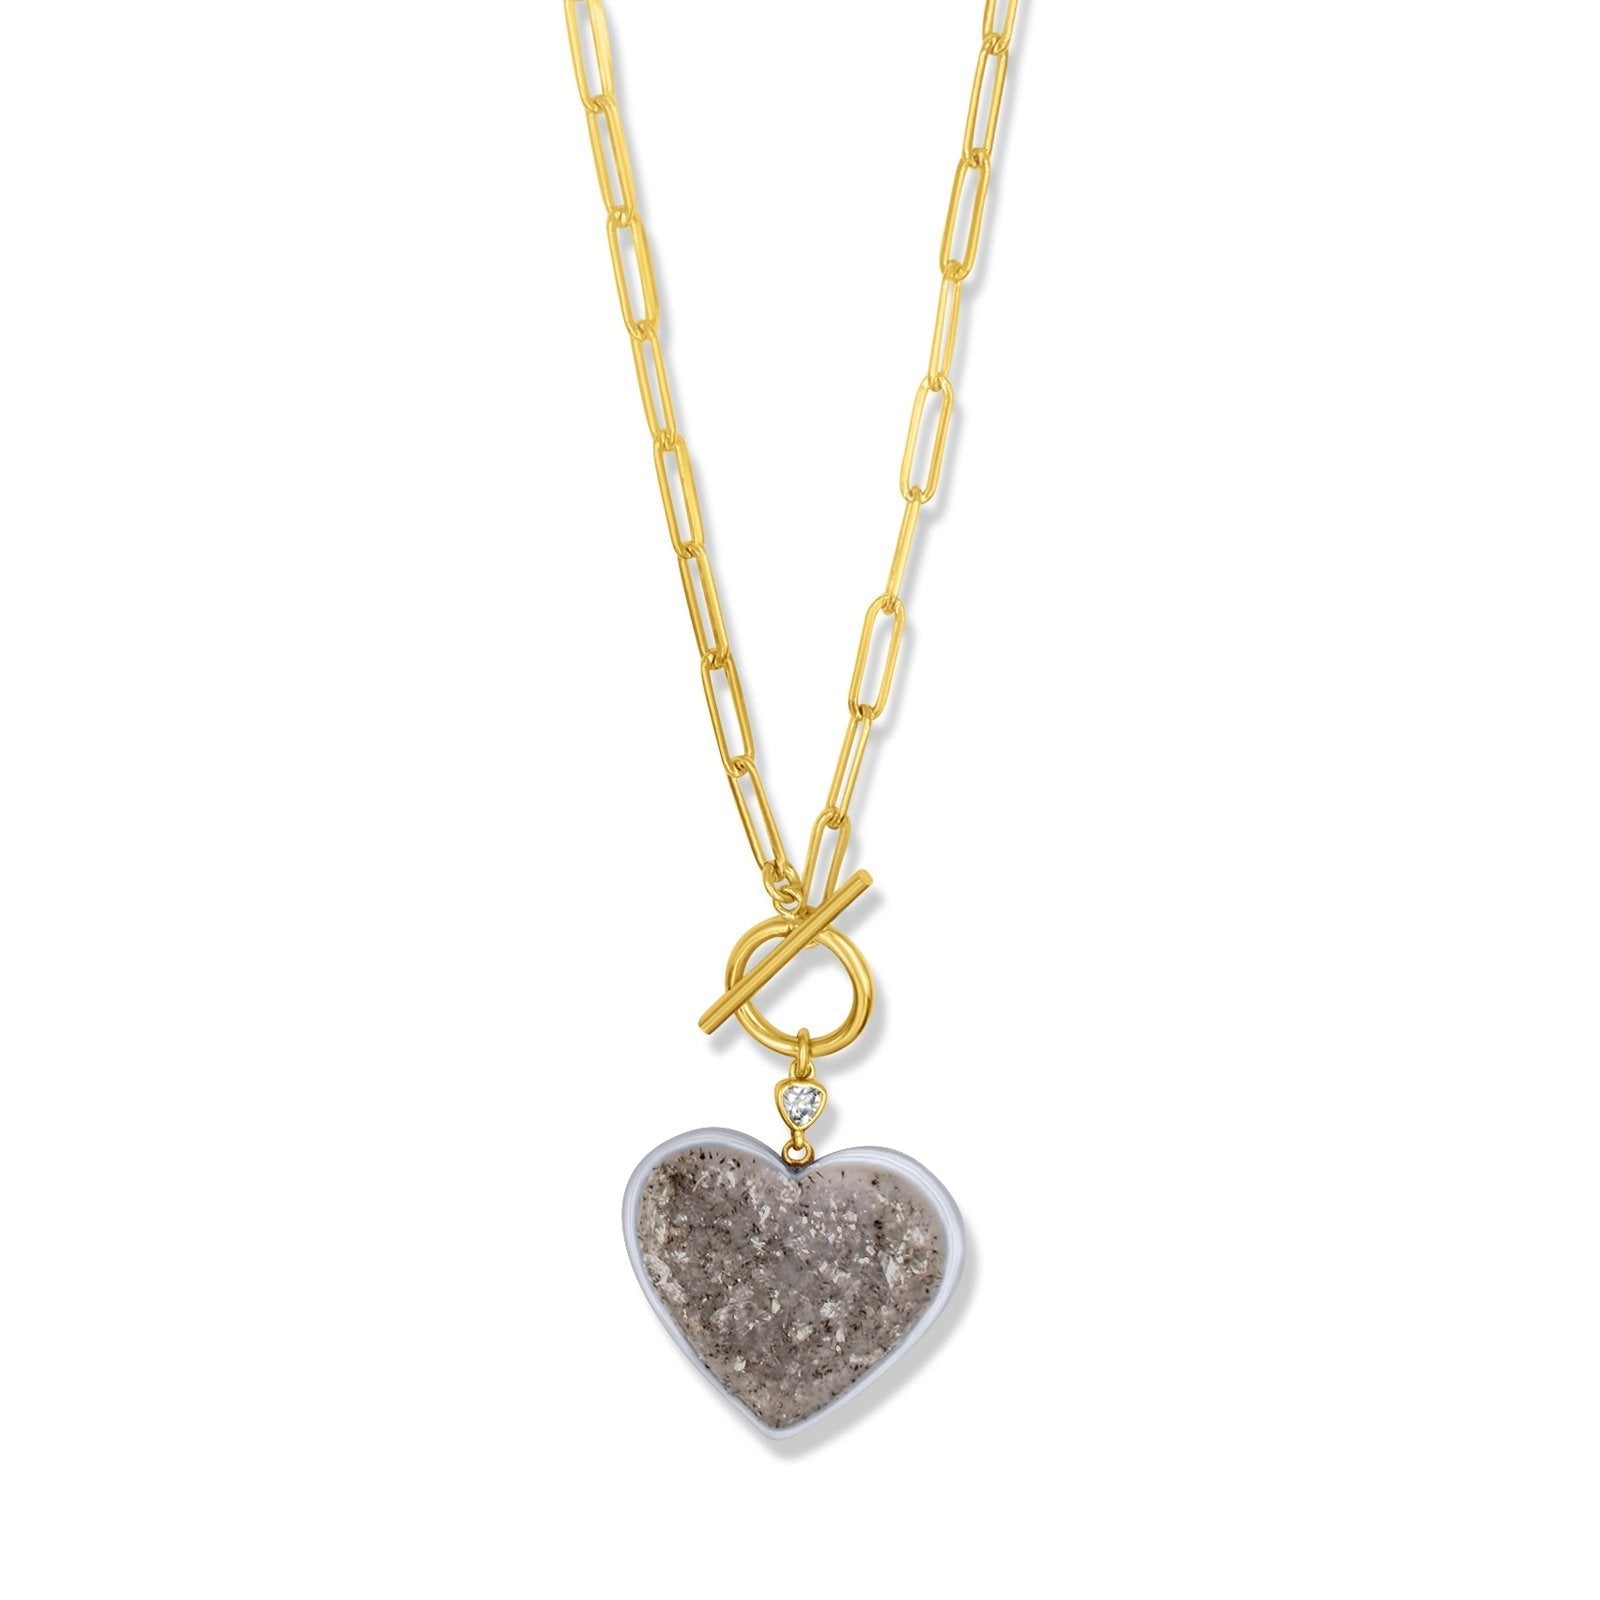 Gold Filled - Druzy Quartz Heart Necklace - Camille Jewelry